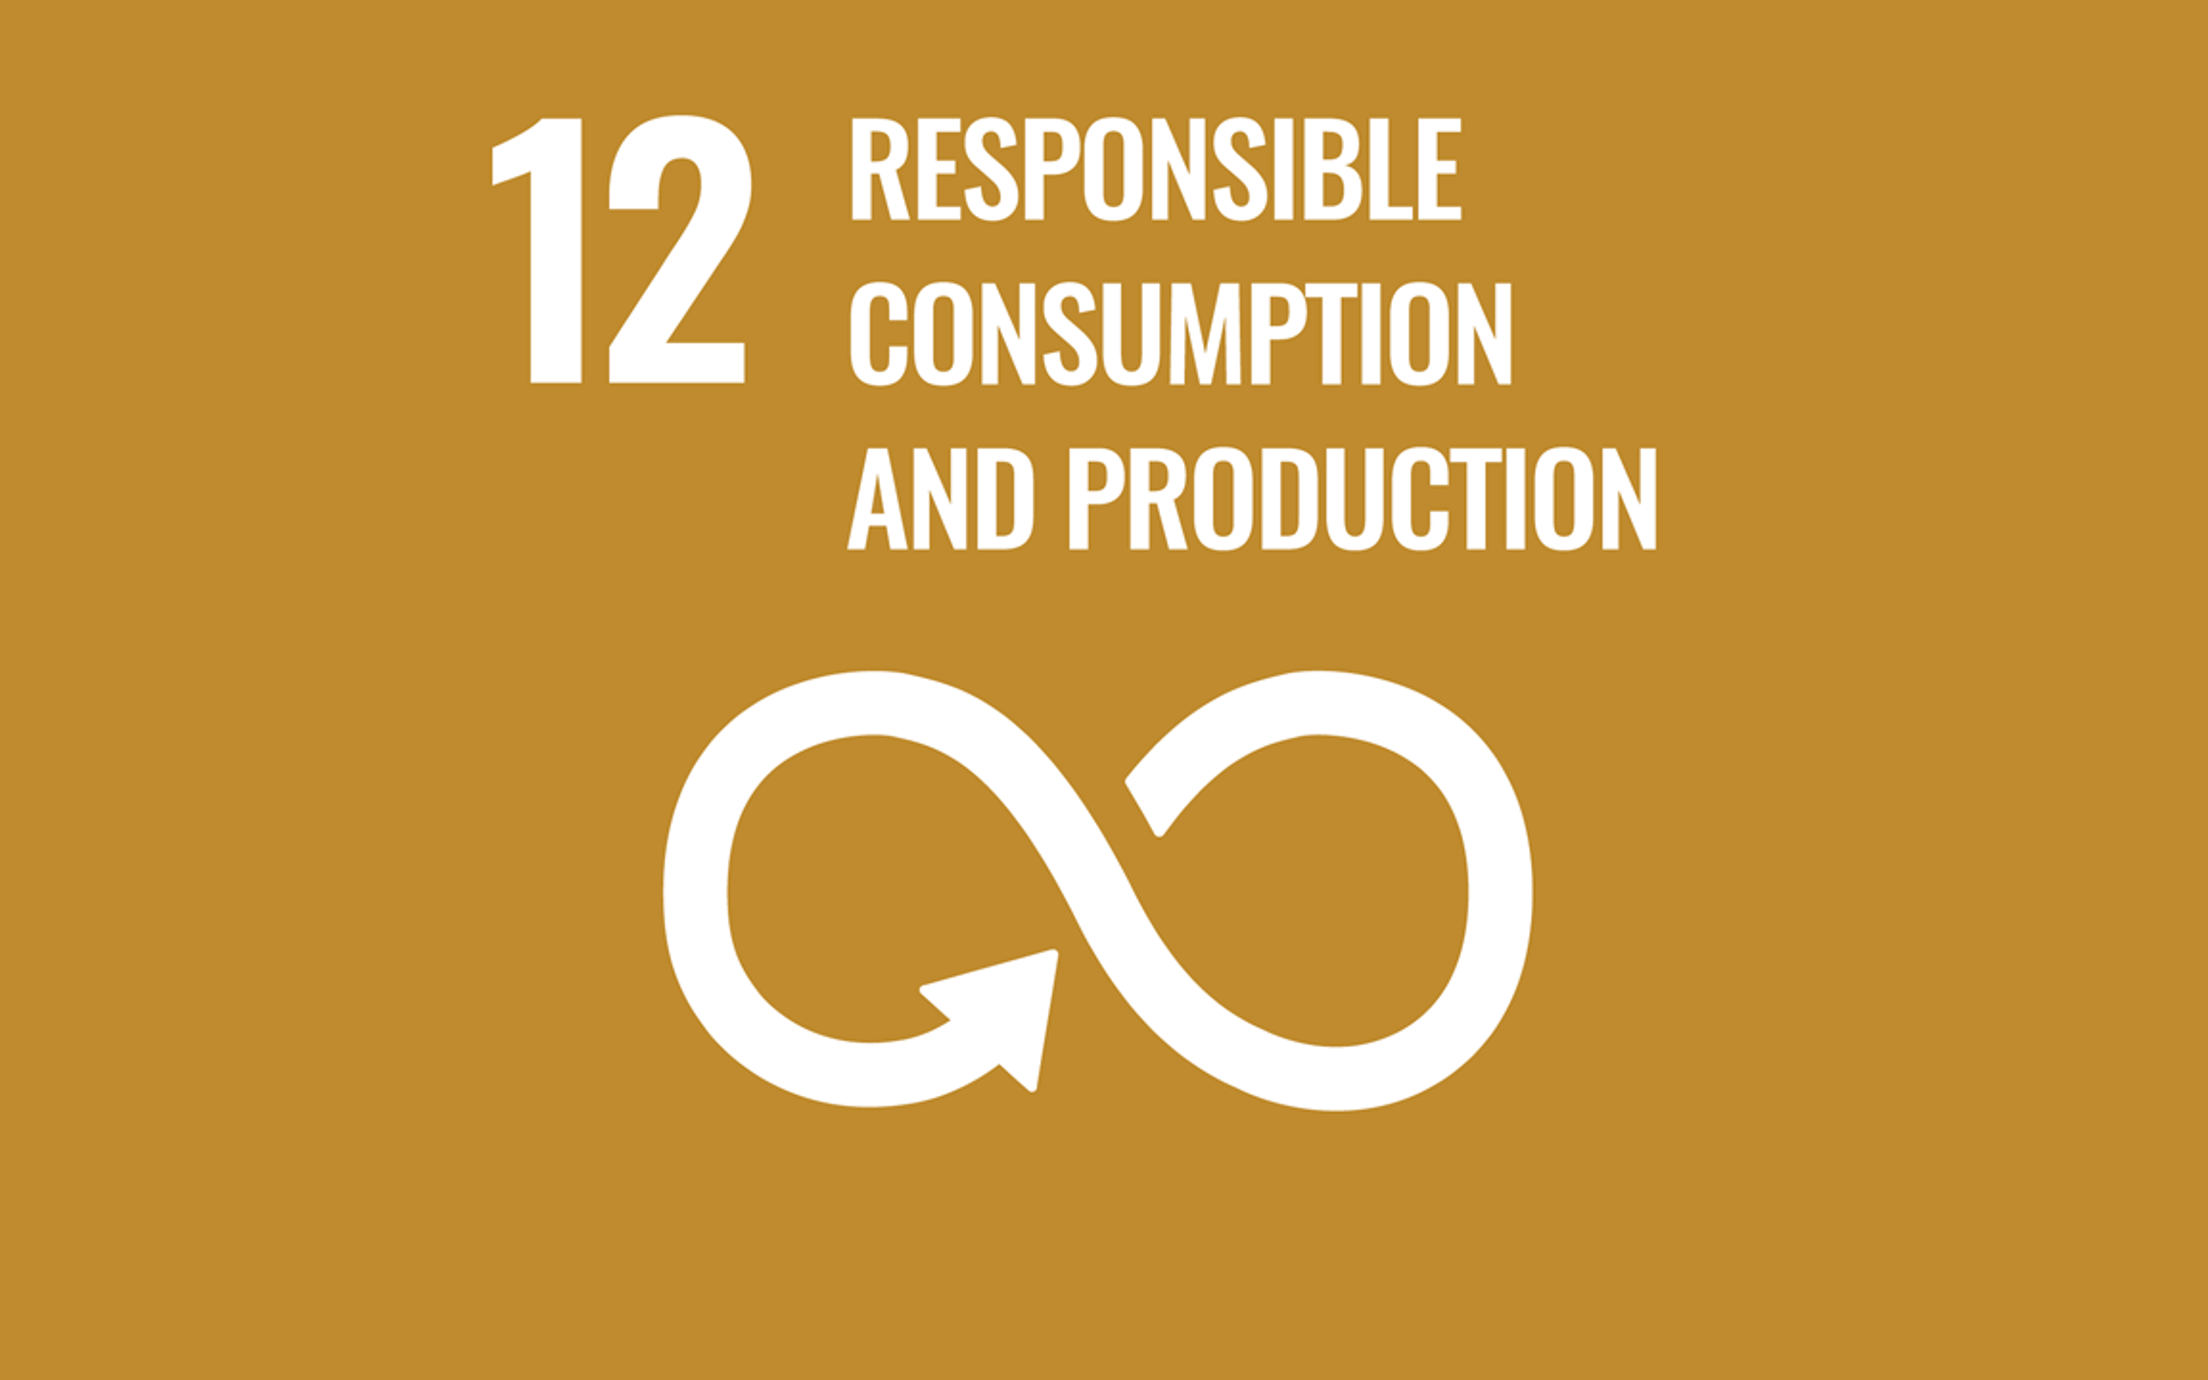 SDG No. 12 – Responsible consumption and production